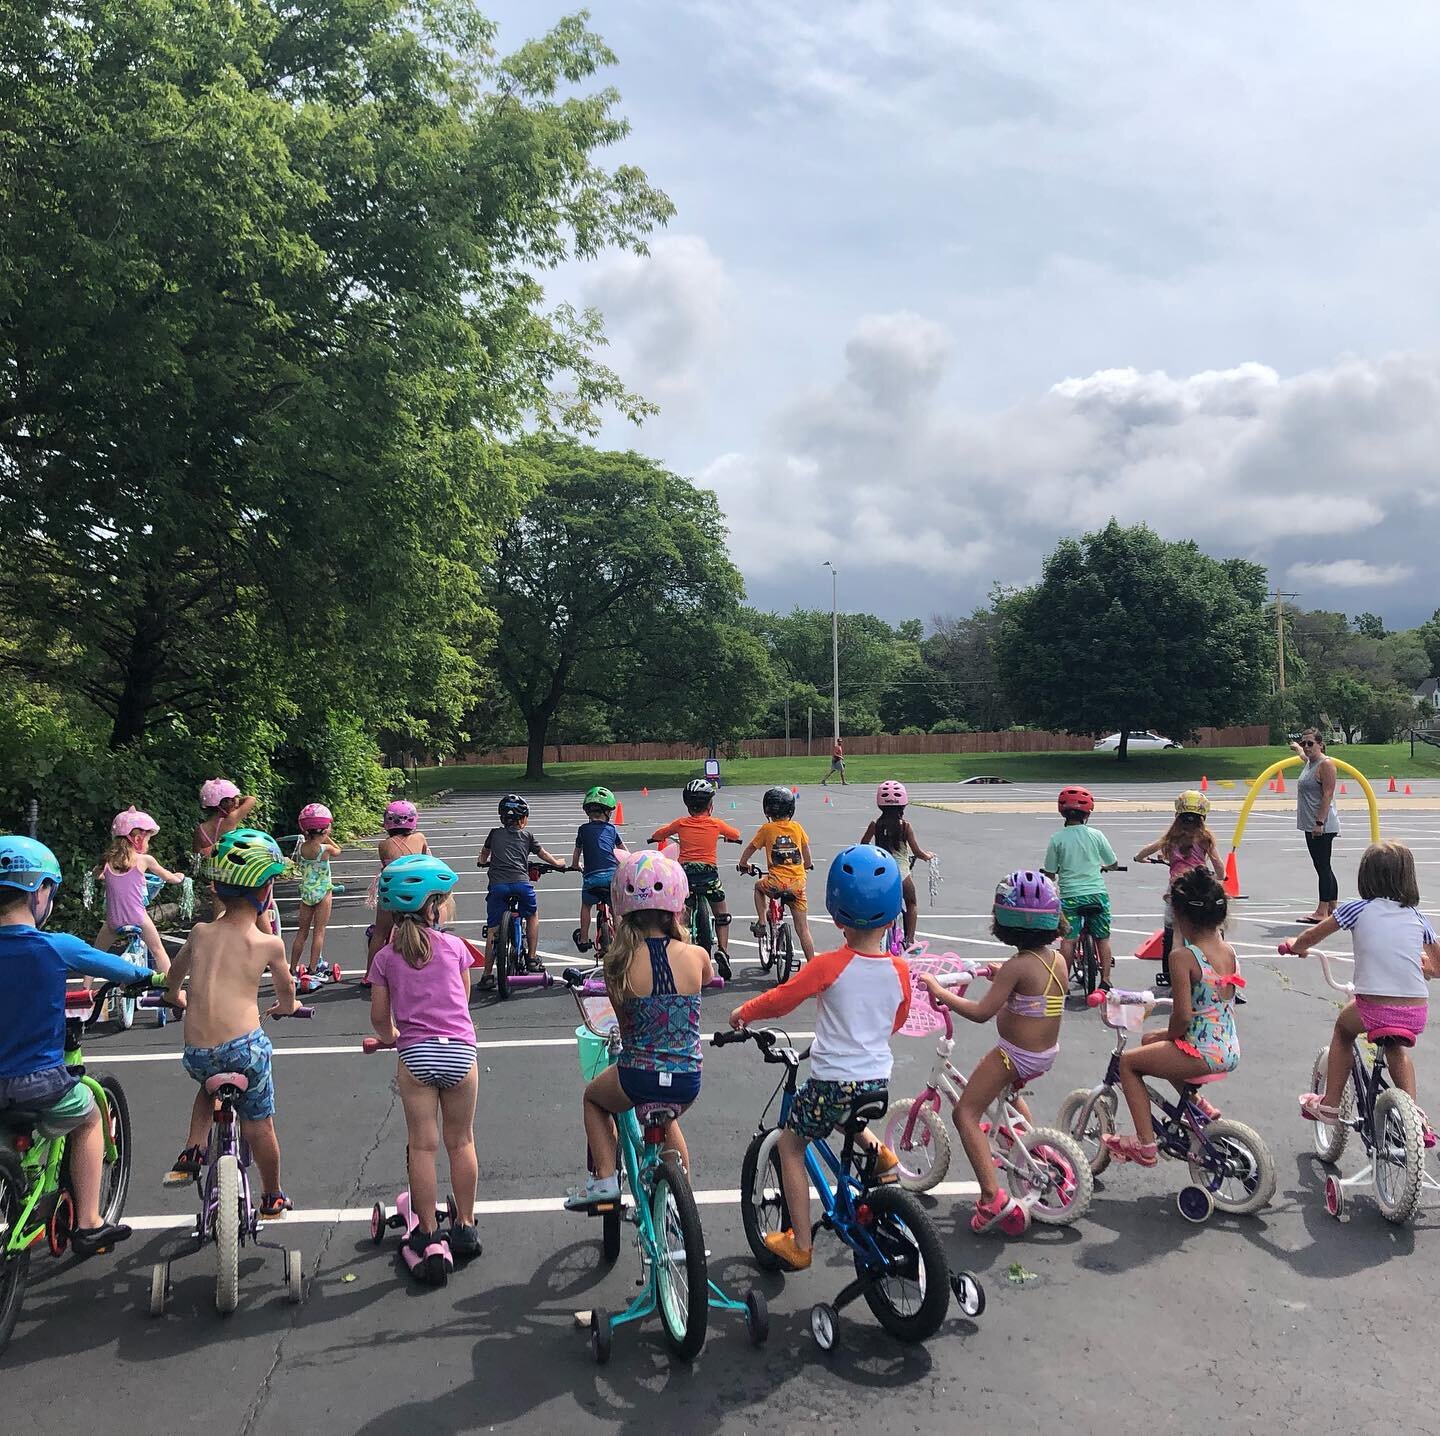 Today the Superstars and the Honeybees had an awesome bike day put on by Tosa Bike Garage. They created a fun obstacle course and a bike wash! One friend afterwards said &ldquo;when can we do that AGAIN!?!&rdquo; Huge thank you to @tosabikegarage. We